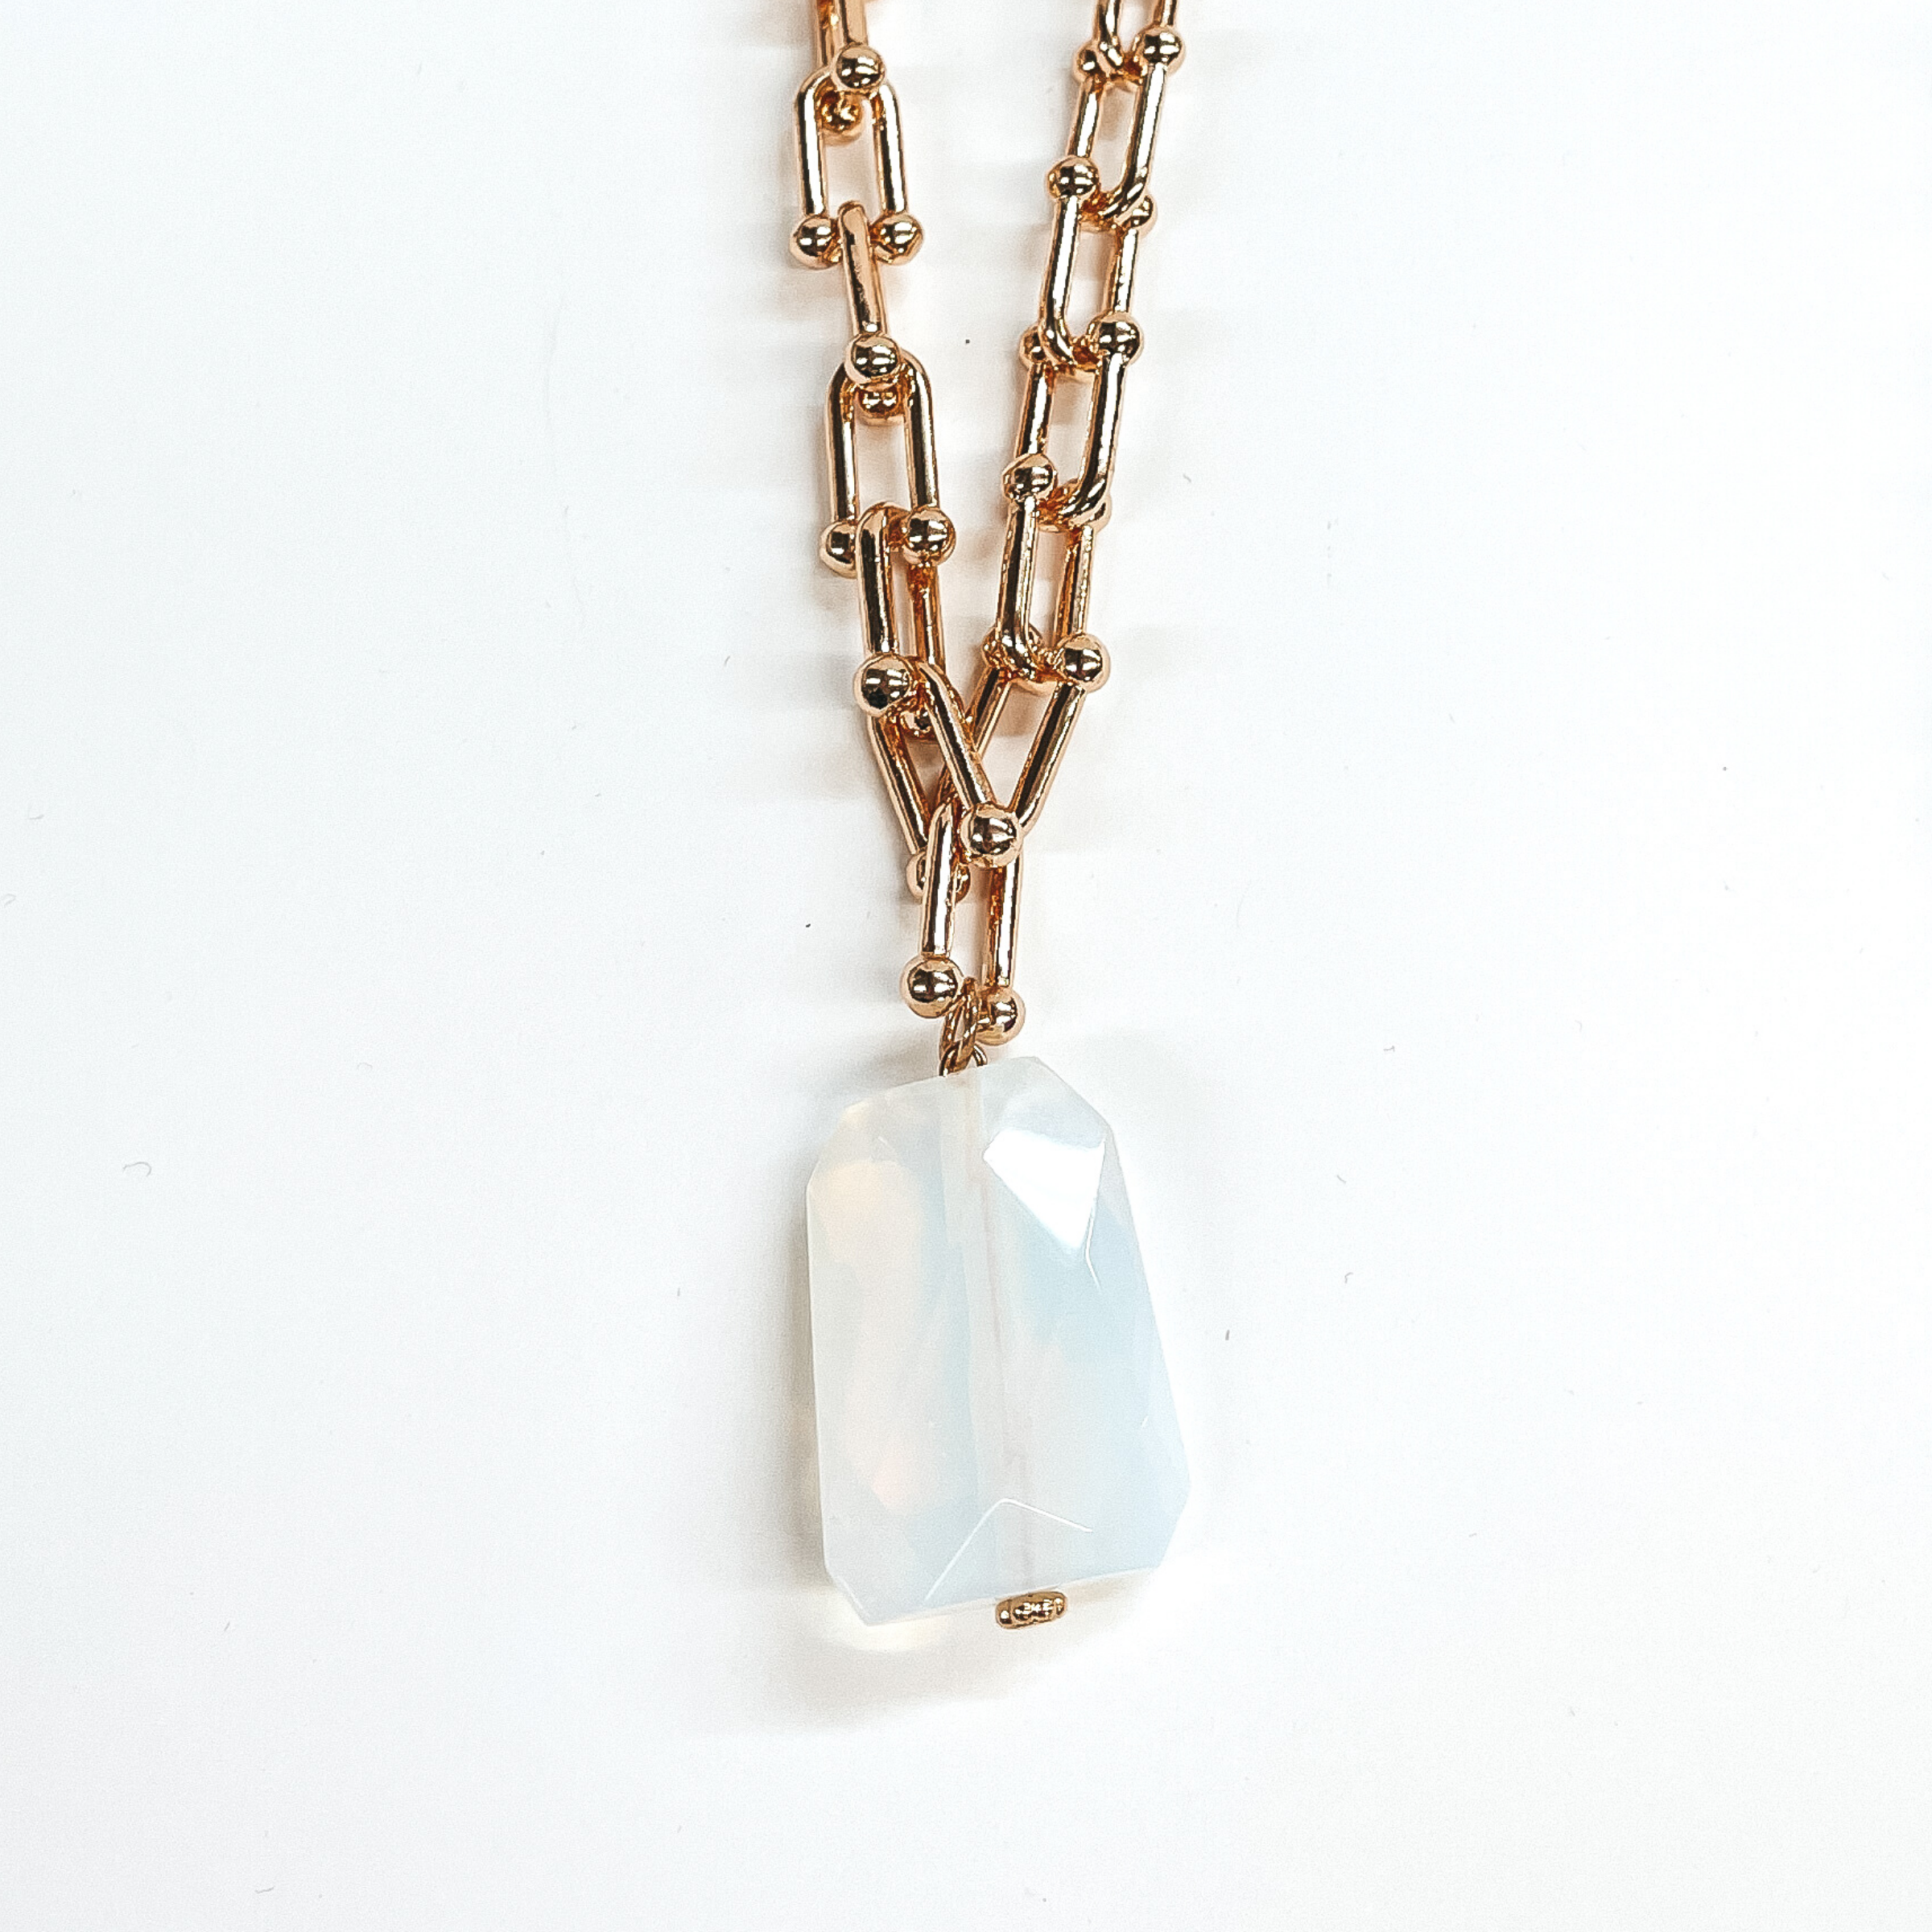 Thick Chain Link Necklace with Chunky Iridescent Stone Pendant - Giddy Up Glamour Boutique